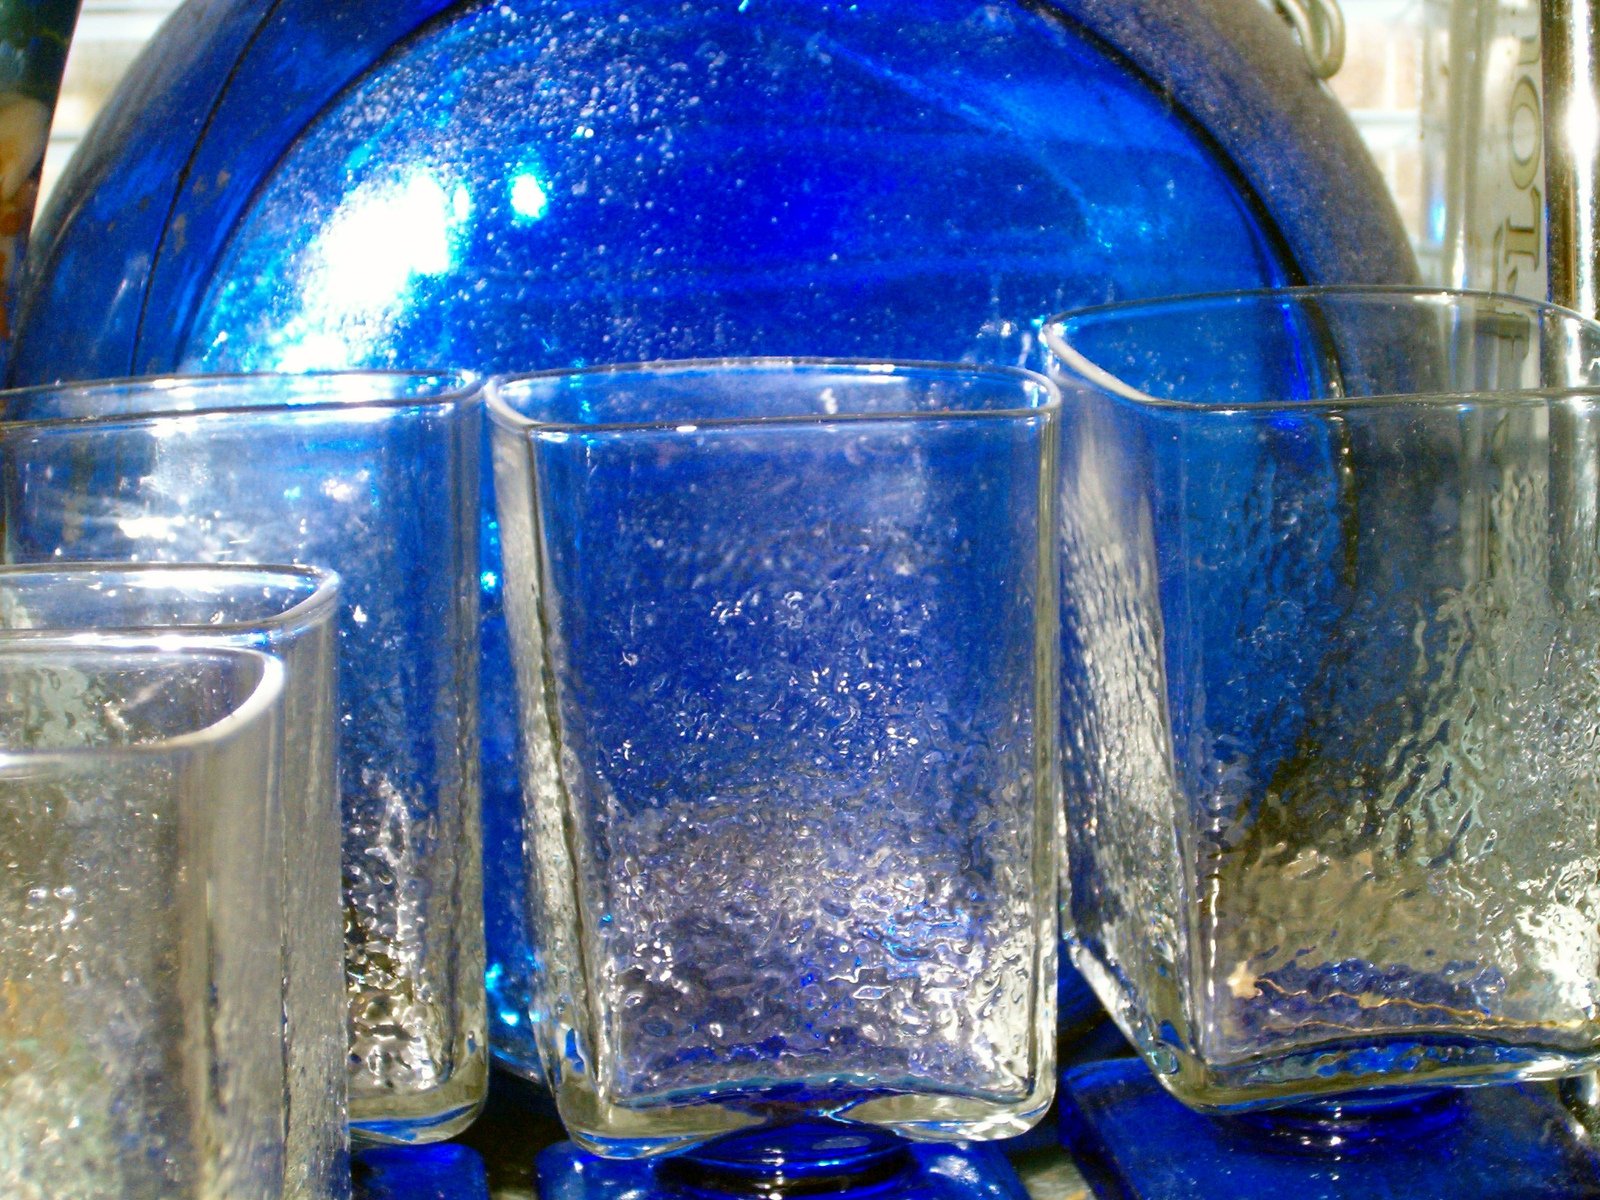 a blue pitcher is seen in front of two glasses